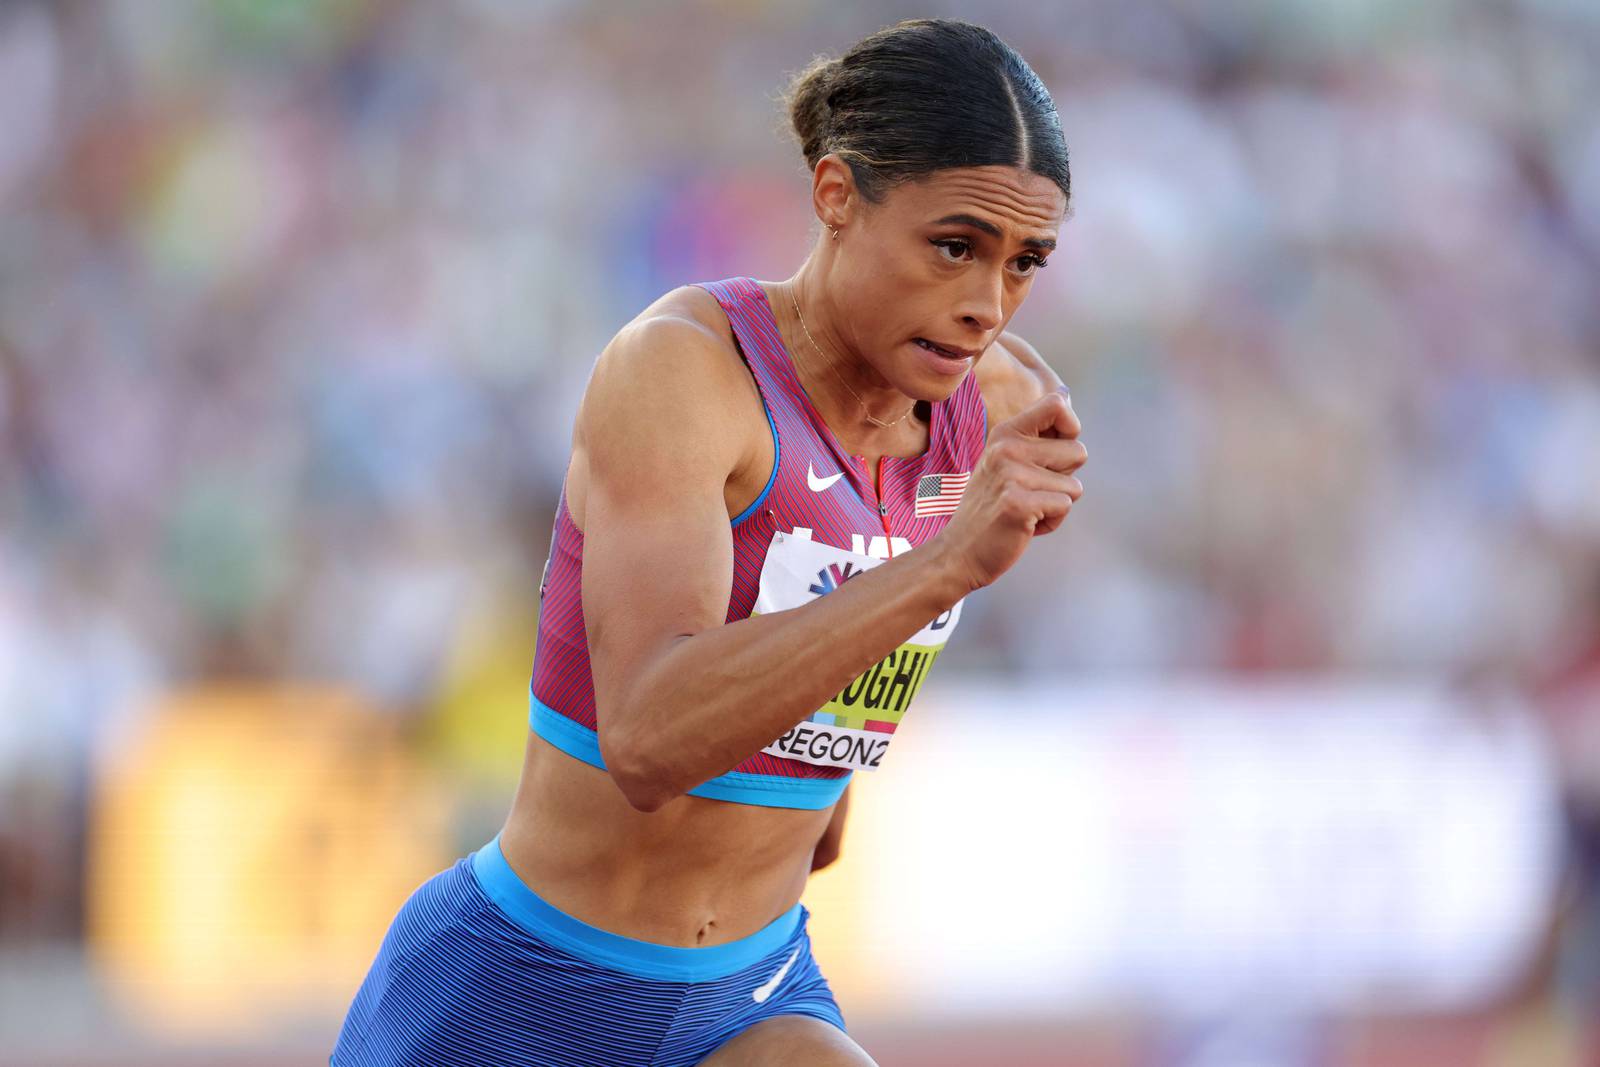 Sydney McLaughlin shatters her 400m hurdles record to win World ...